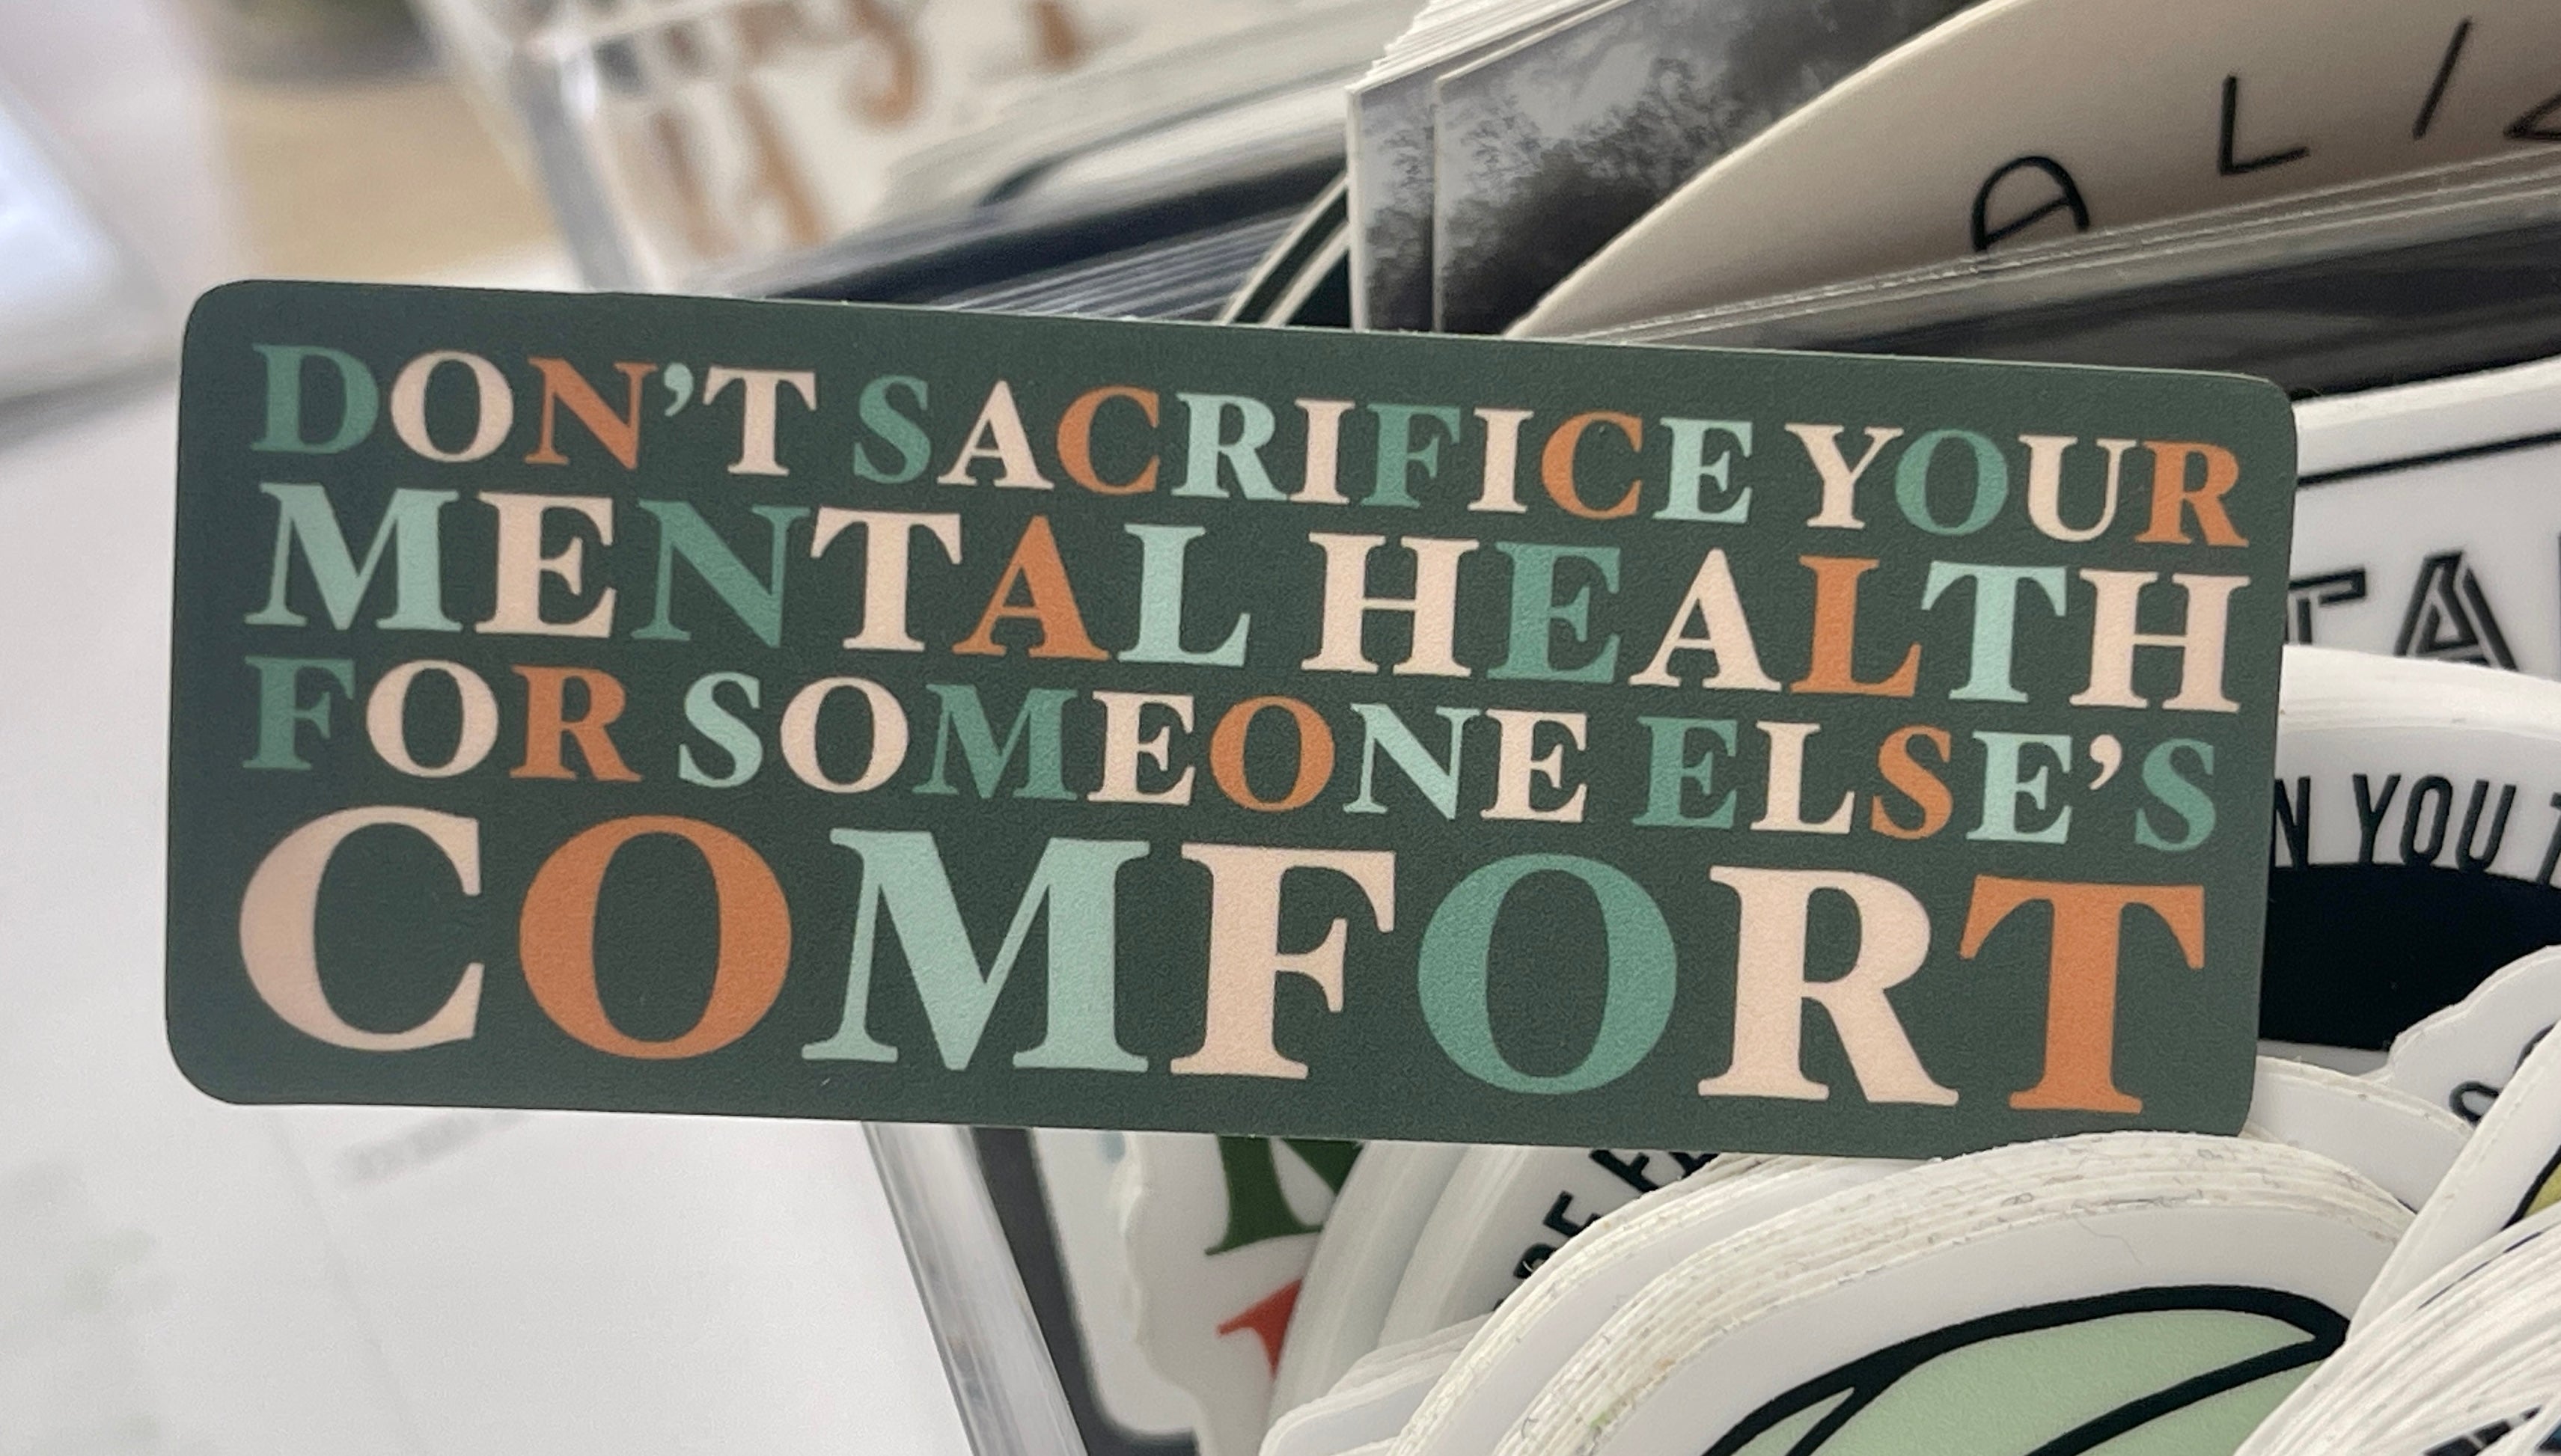 Don't sacrifice your mental health for someone else's comfort